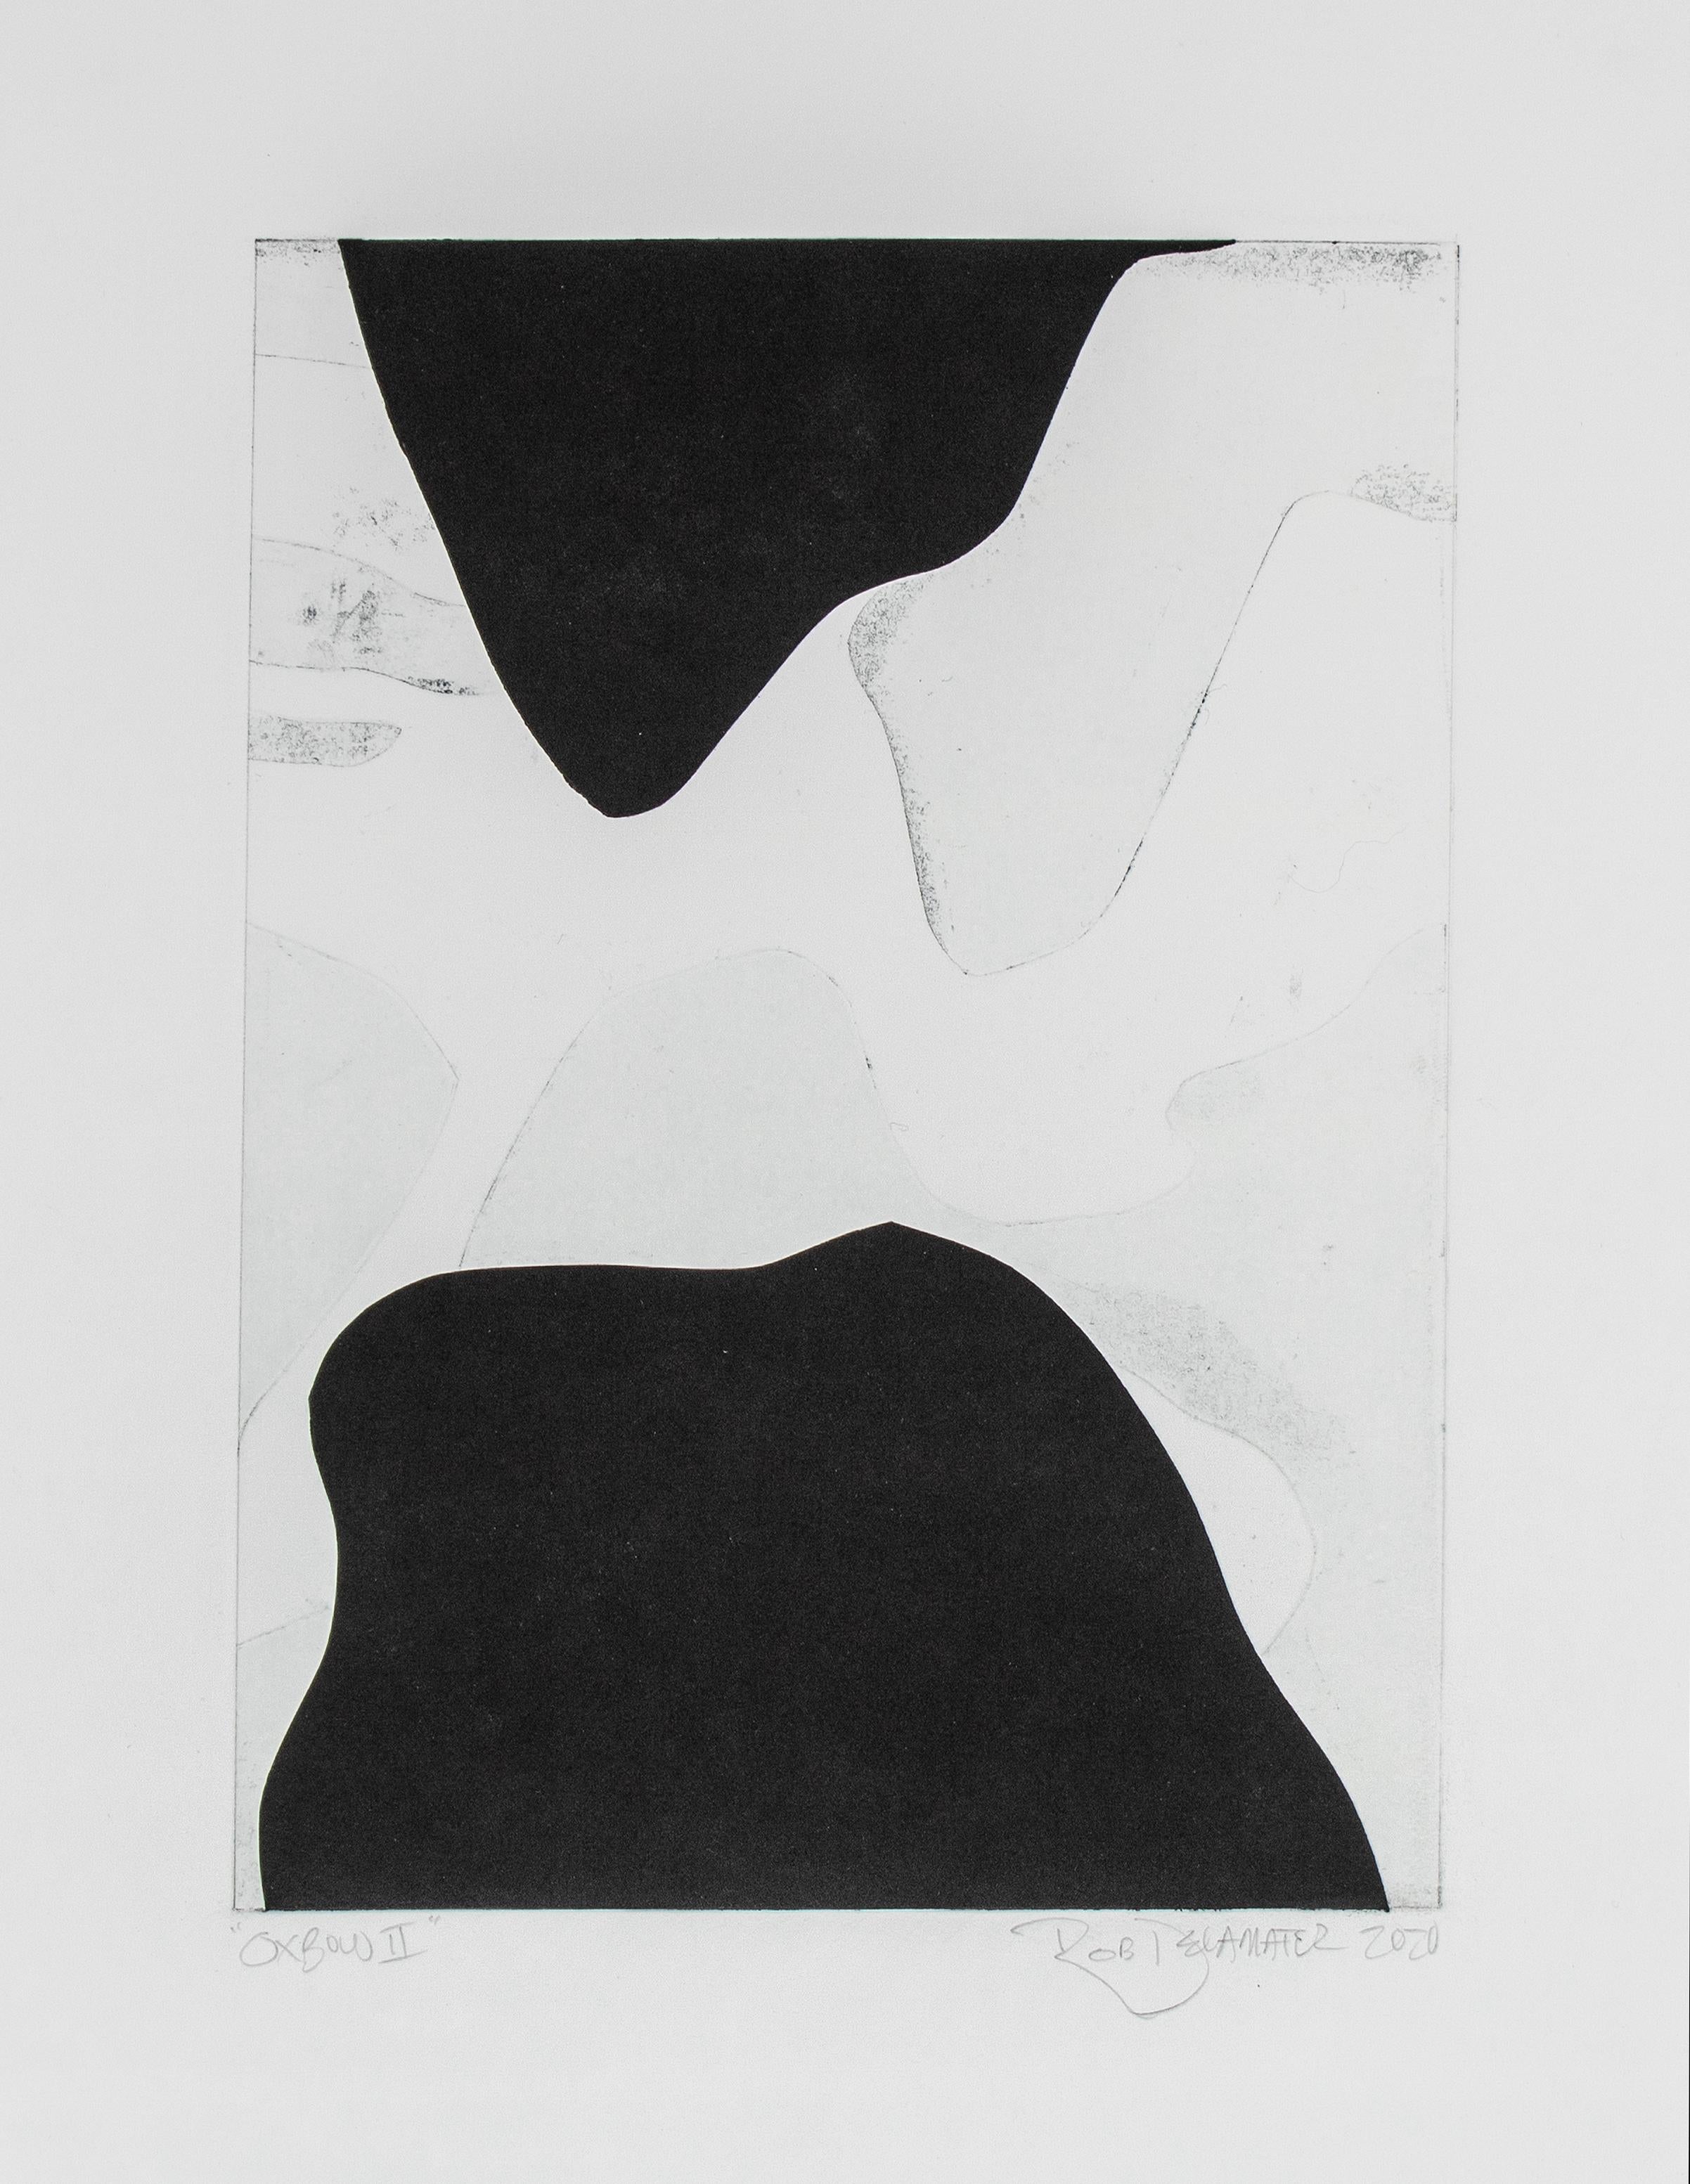 Rob Delamater Abstract Print - "Oxbow II" 2020 Monotype